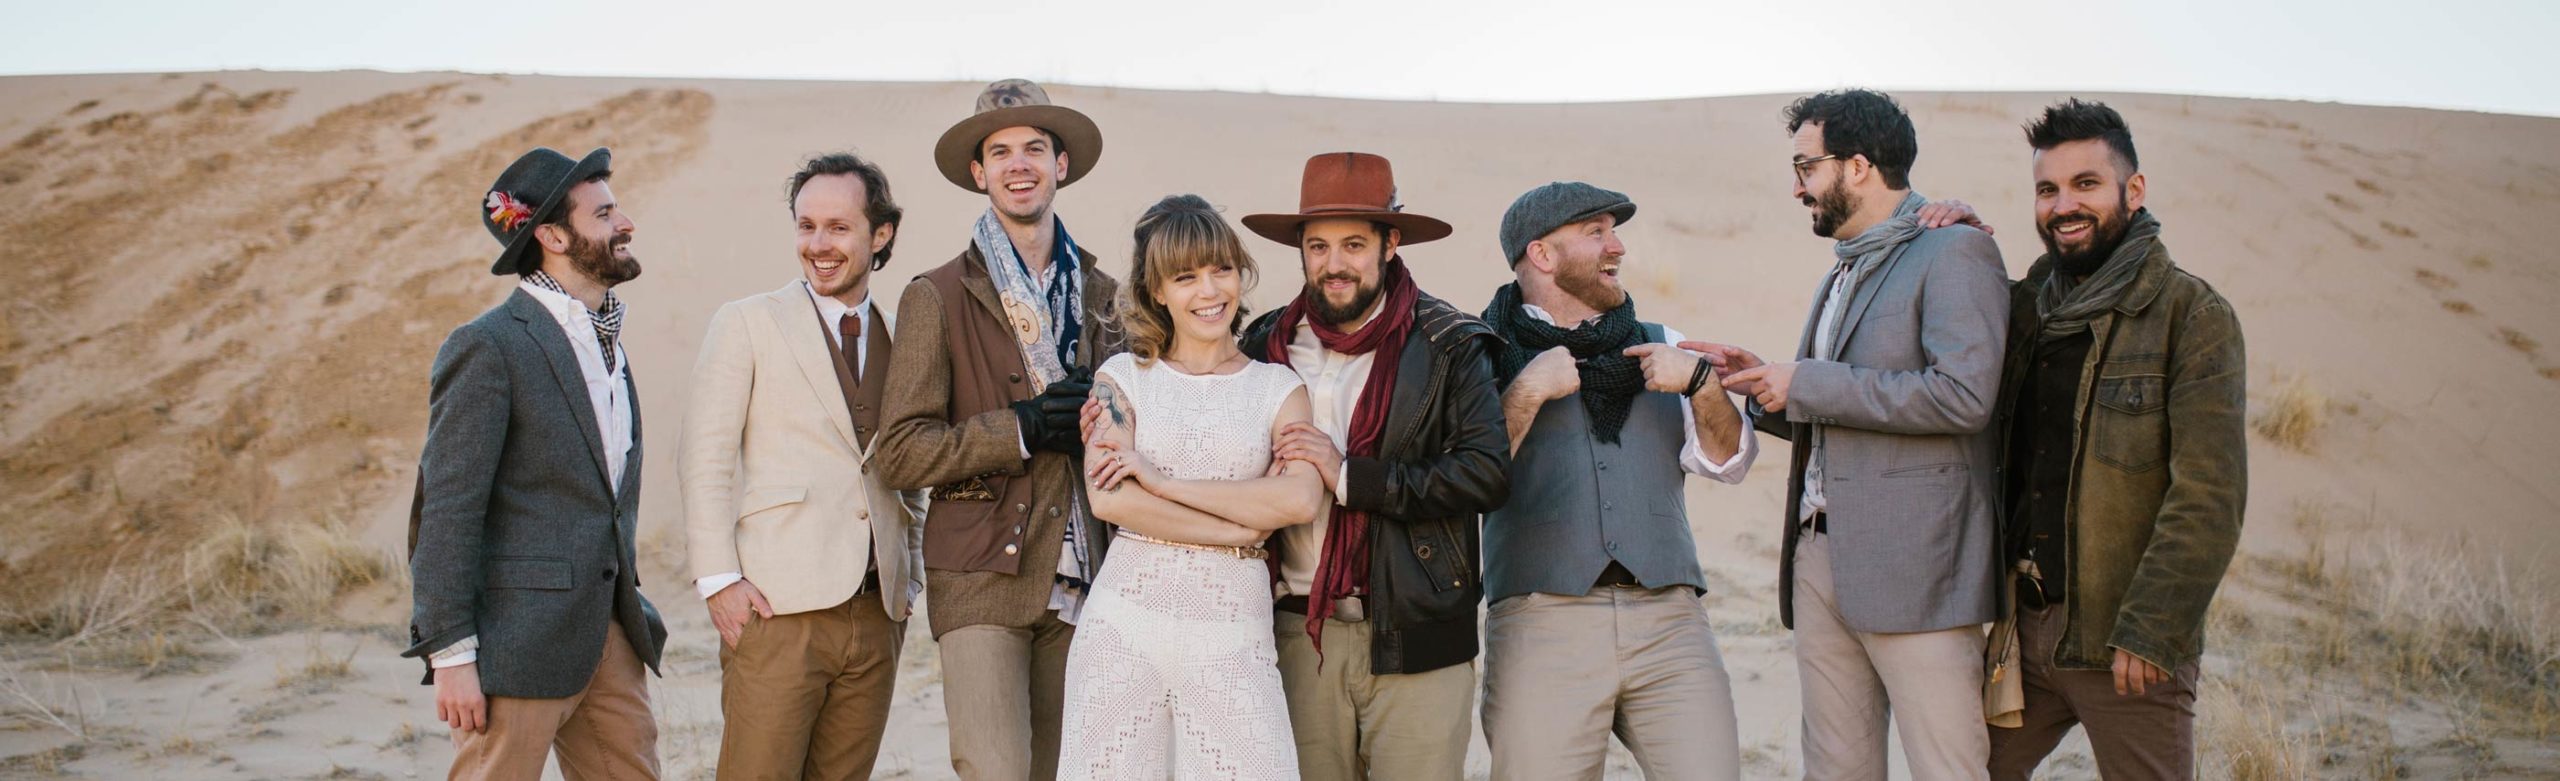 Americana Soul Fusion: Dustbowl Revival to Bring Their Special Brand of Joyous Folk Music Back to Missoula Image